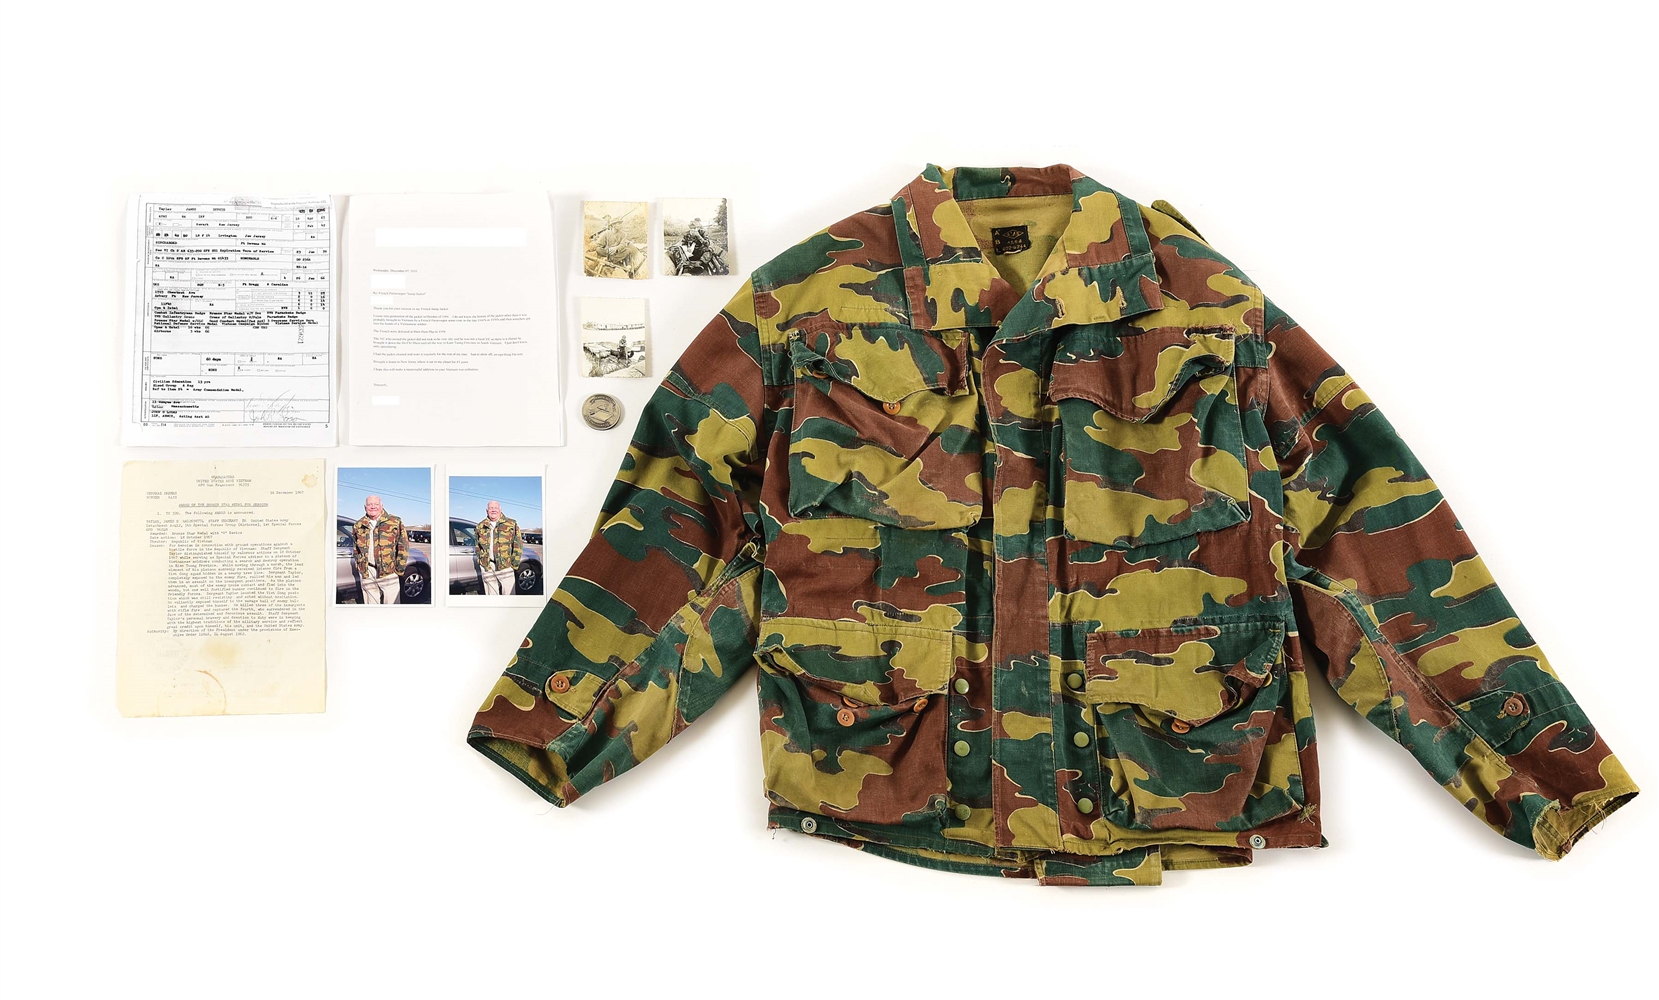 US VIETNAM WAR FRENCH PARATROOPER JACKET CAPTURED FROM VC AND WORN BY SGT. JAMES D. TAYLOR, 10TH SFG.